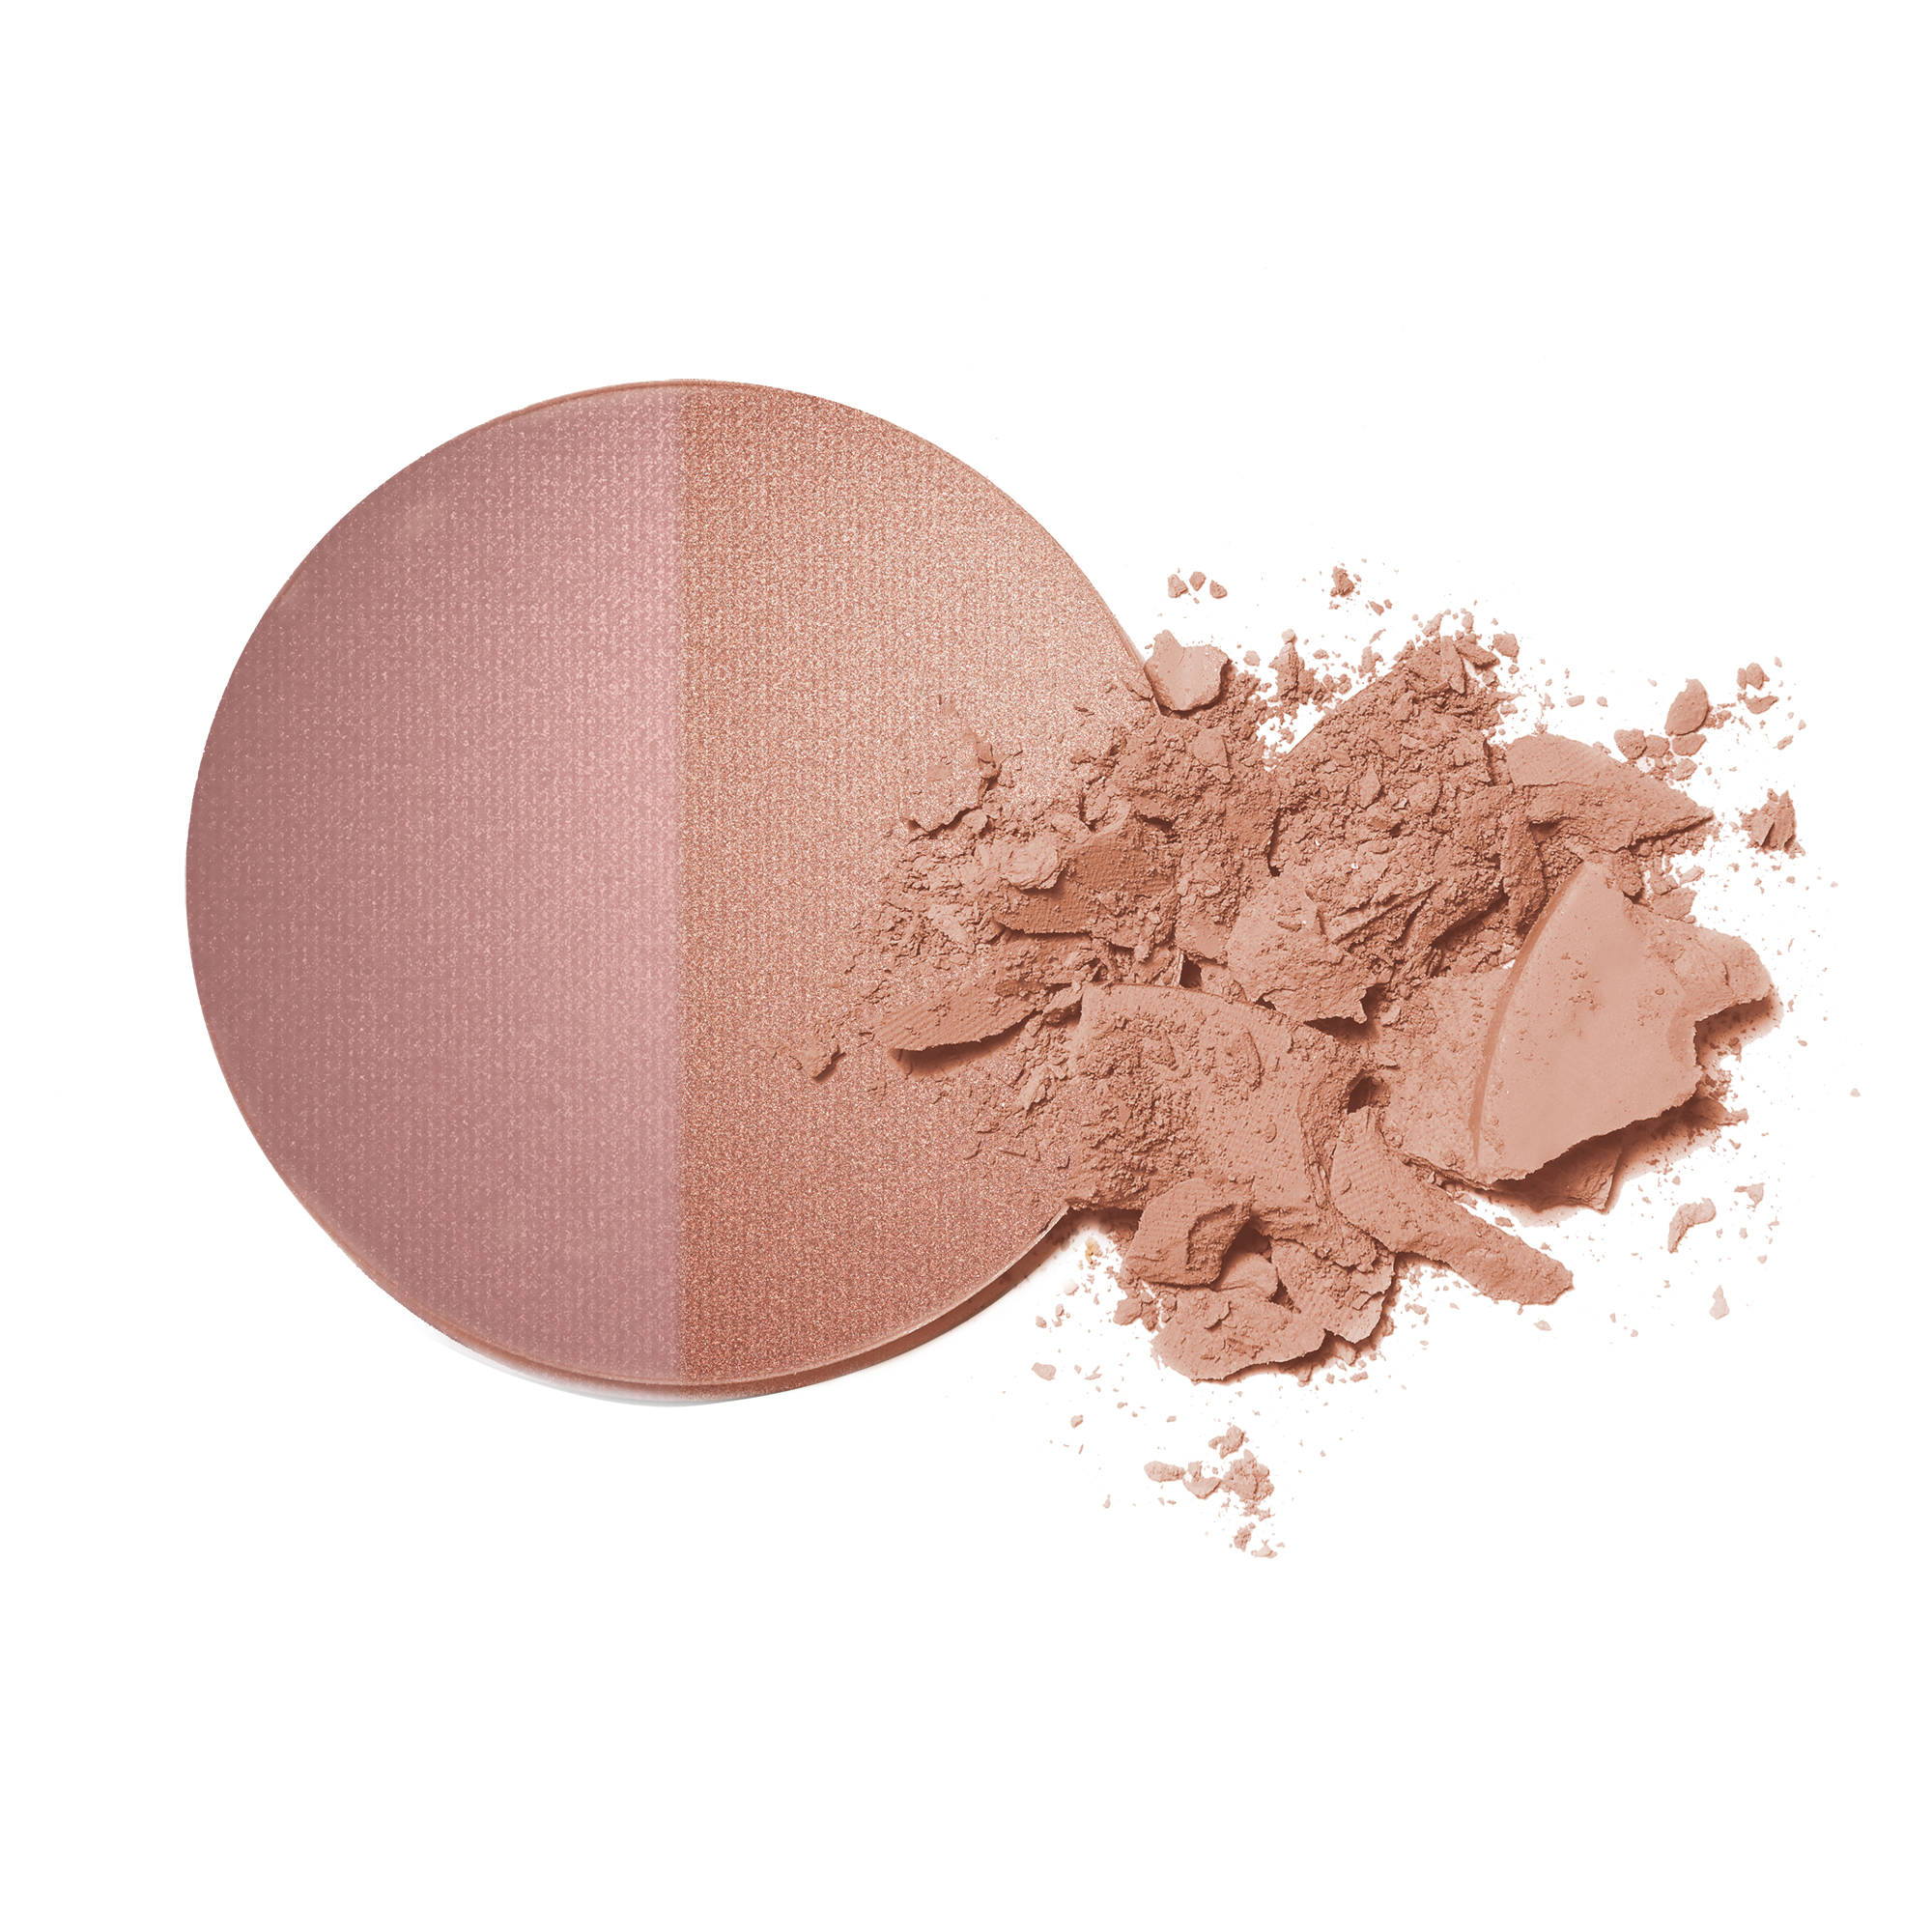 Blush | Baked Mineral Duo Blush